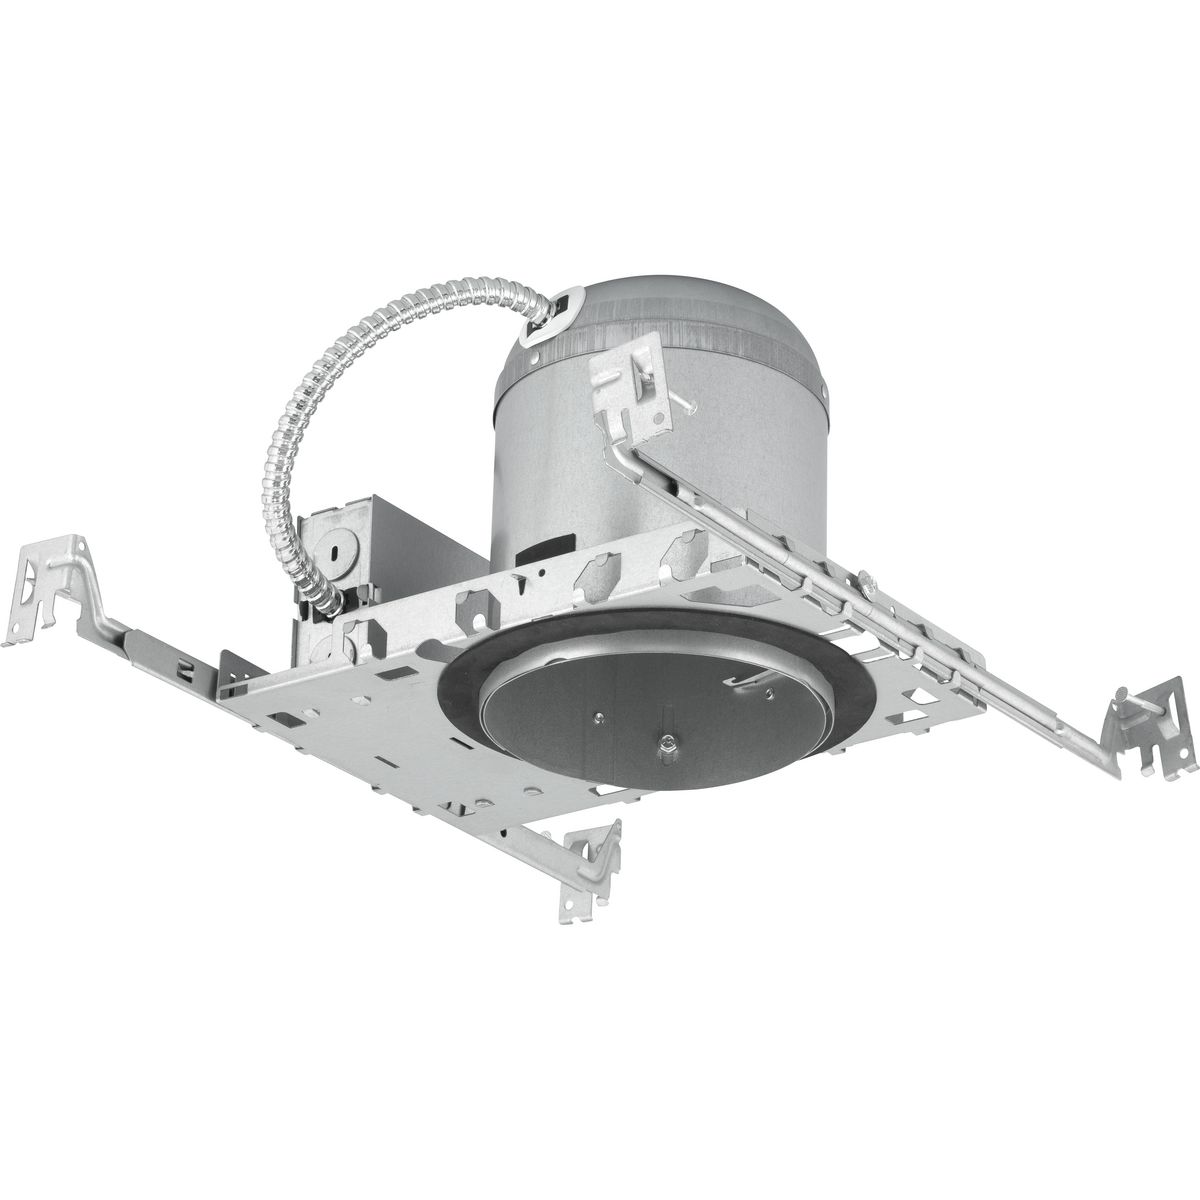 The 5 in IC, airtight, incandescent downlight housing can also be used for most light commercial and residential applications where insulated ceilings require an IC rated, line voltage downlight.